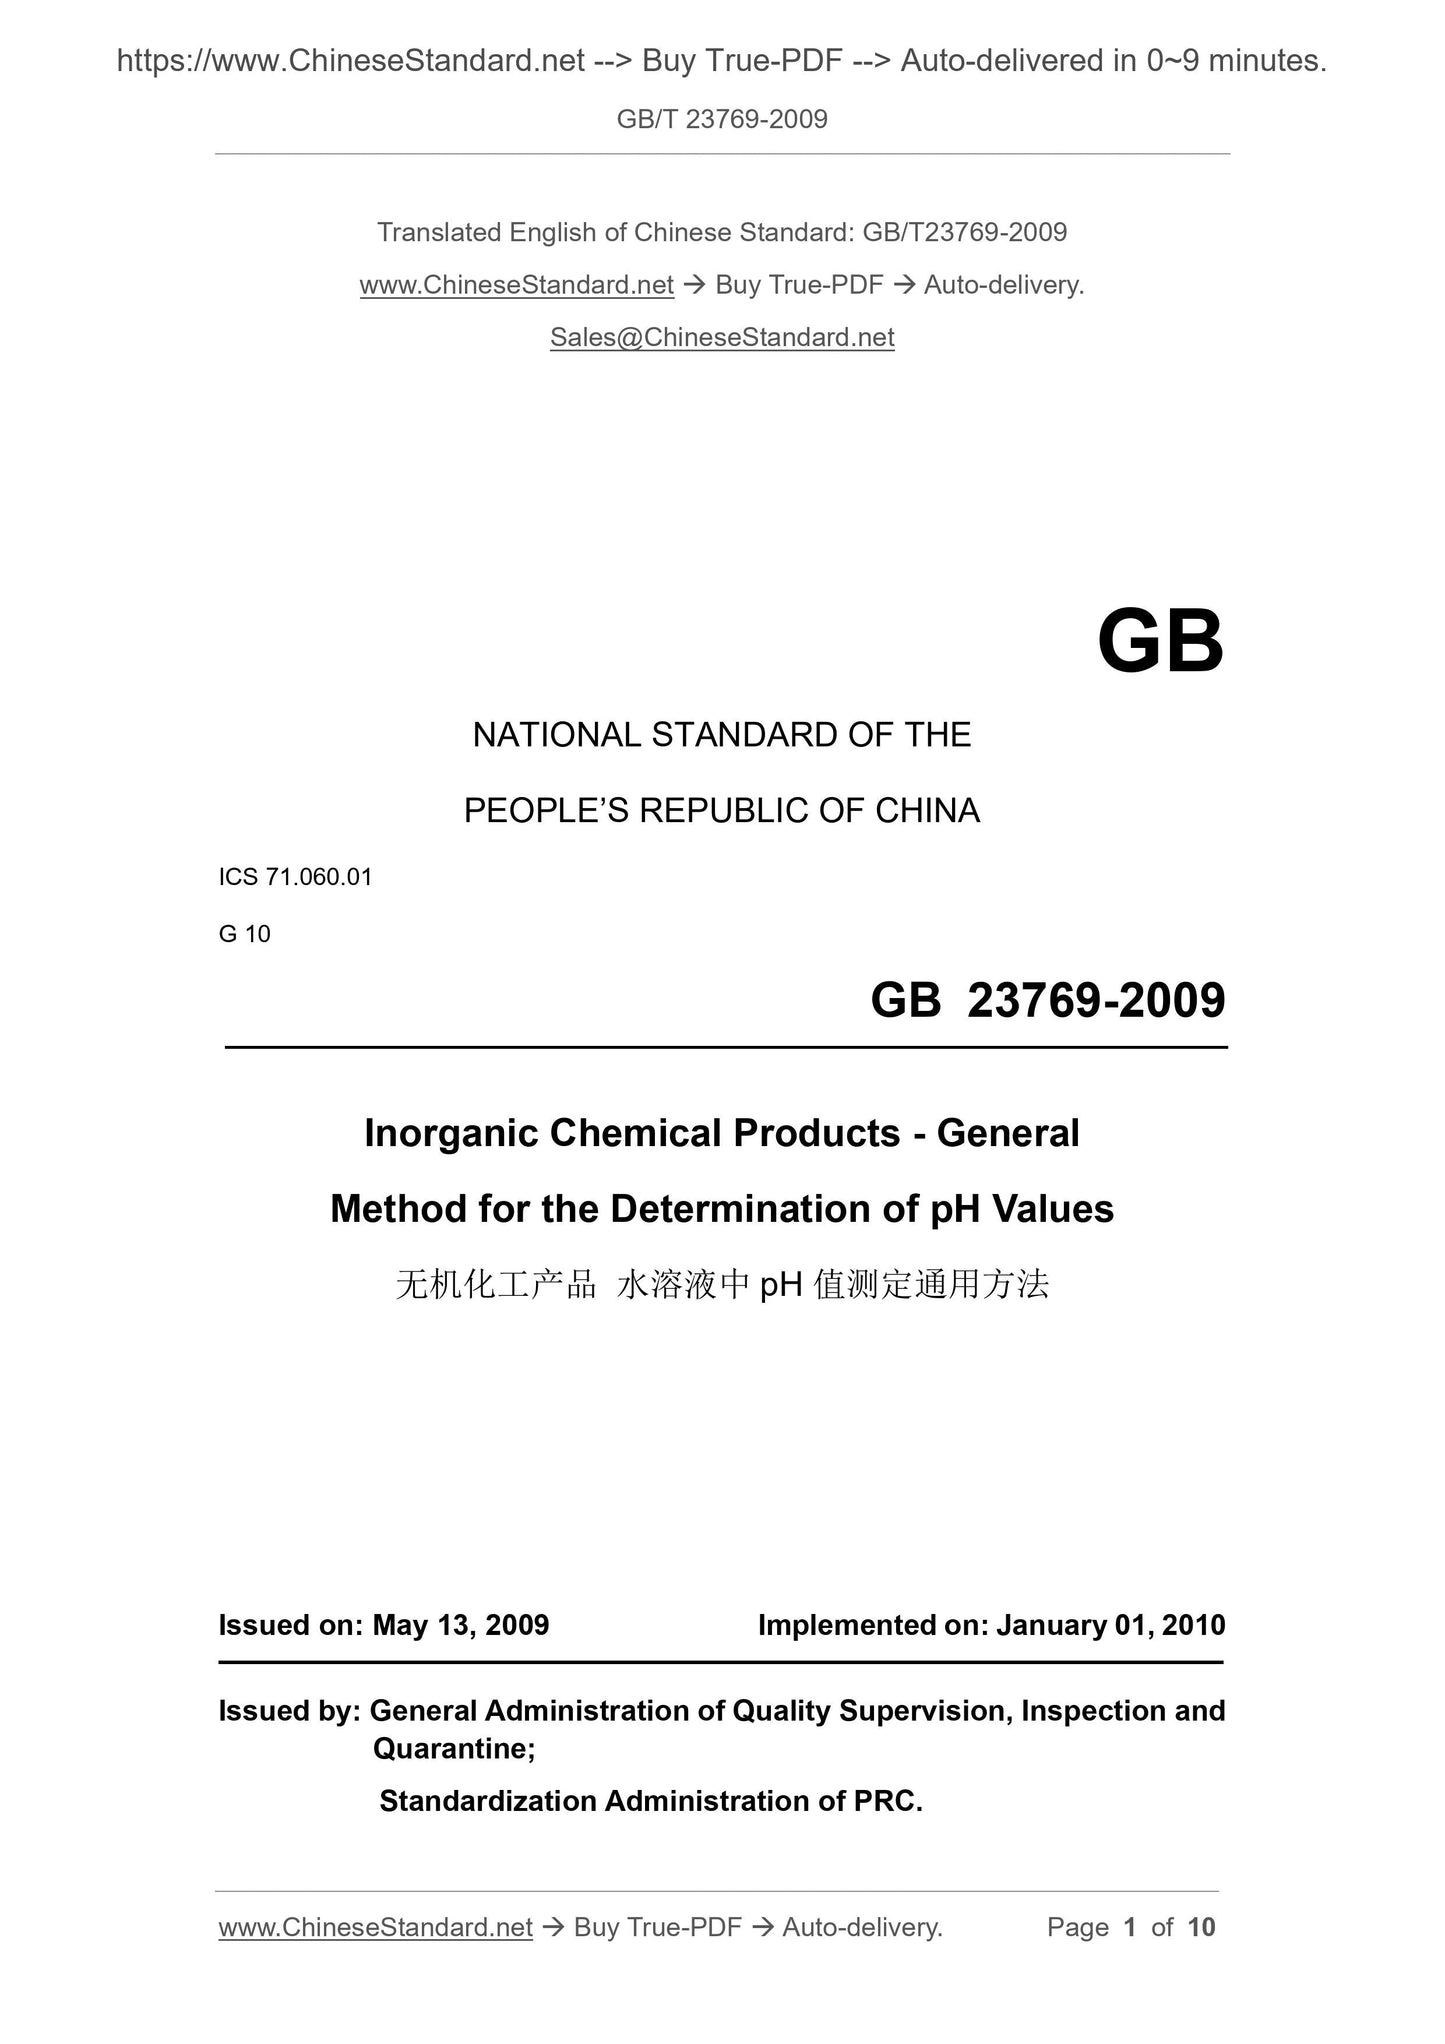 GB/T 23769-2009 Page 1